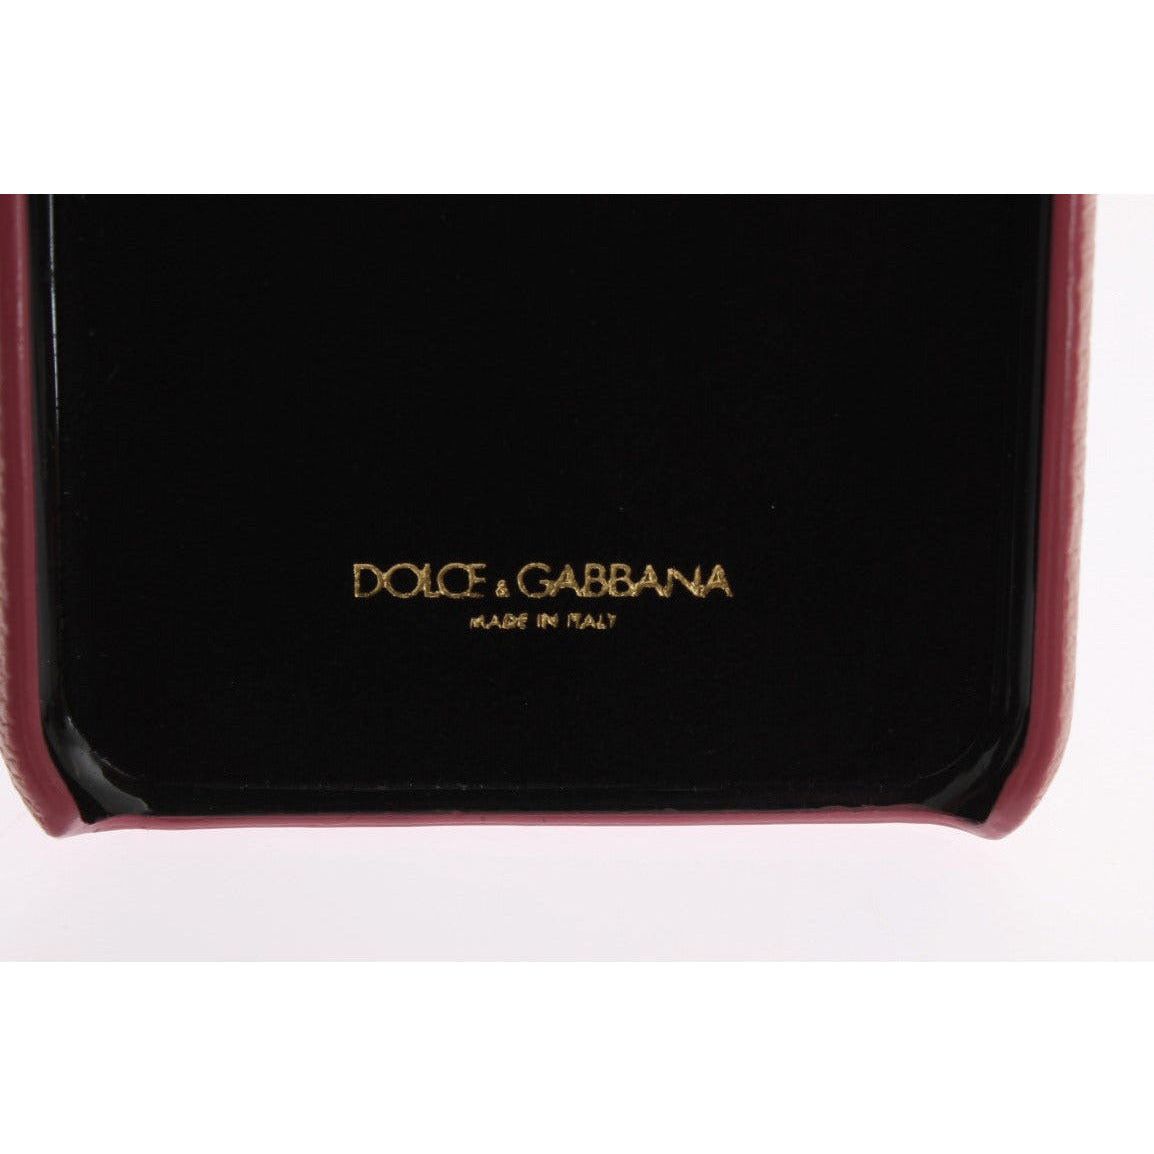 Dolce & Gabbana Chic Pink Leather Crystal iPhone Case pink-leather-heart-crystal-phone-case